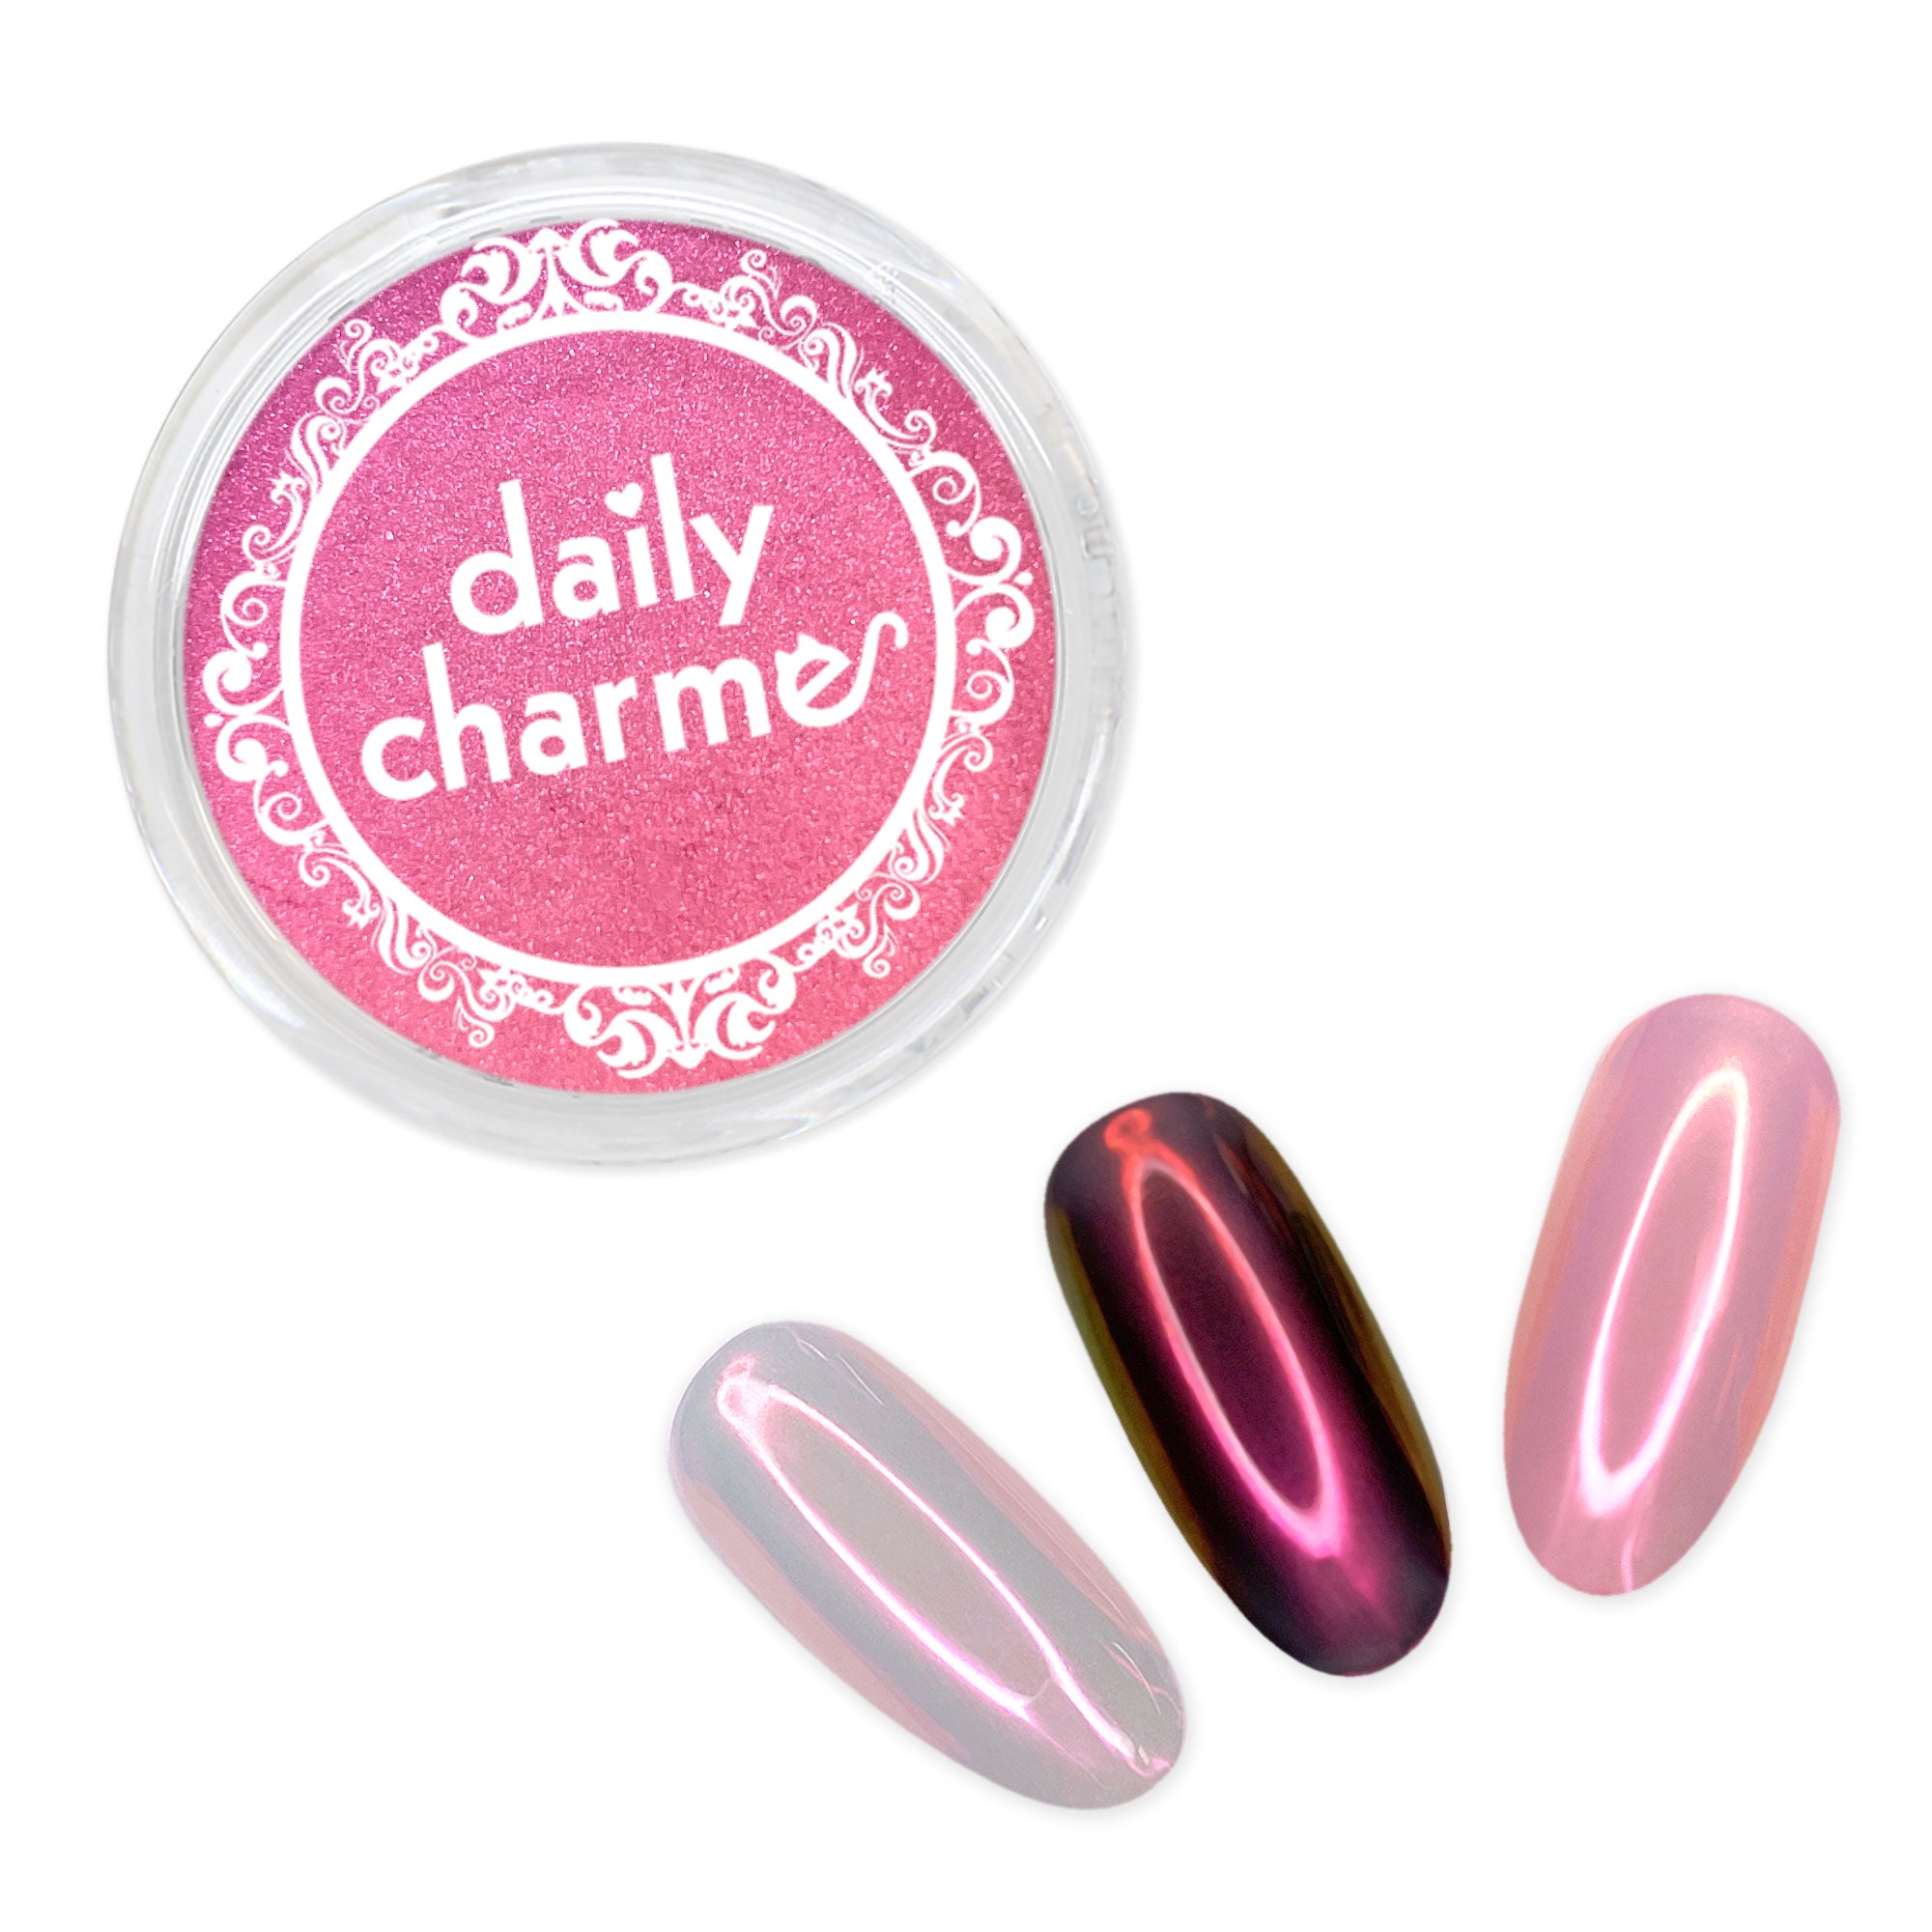 Daily Charme Stardust Chrome Powder / Ruby Red Iridescent Aurora Nails